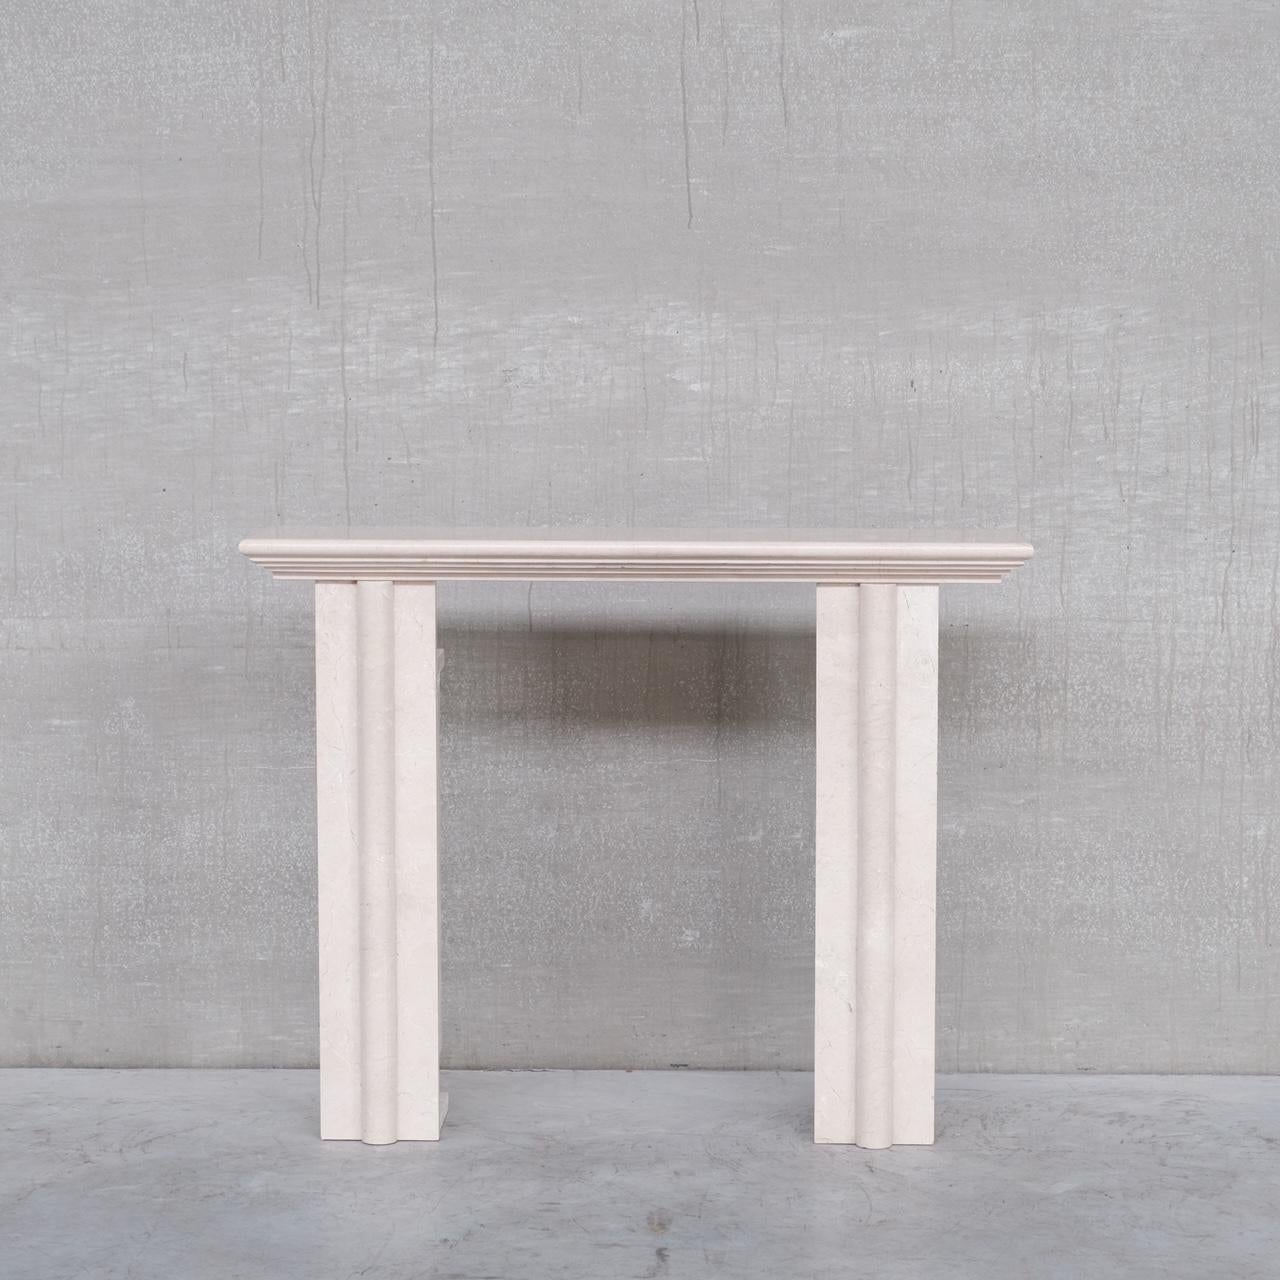 A travertine Belgium wall console. 

Two pillars with an elegant single shelf. 

Belgium, c1980s. 

Unusually it is open internally from the inside corners, priced accordingly. 

Location: Belgium Gallery. 

Dimensions: 128 W x 27 D x 101